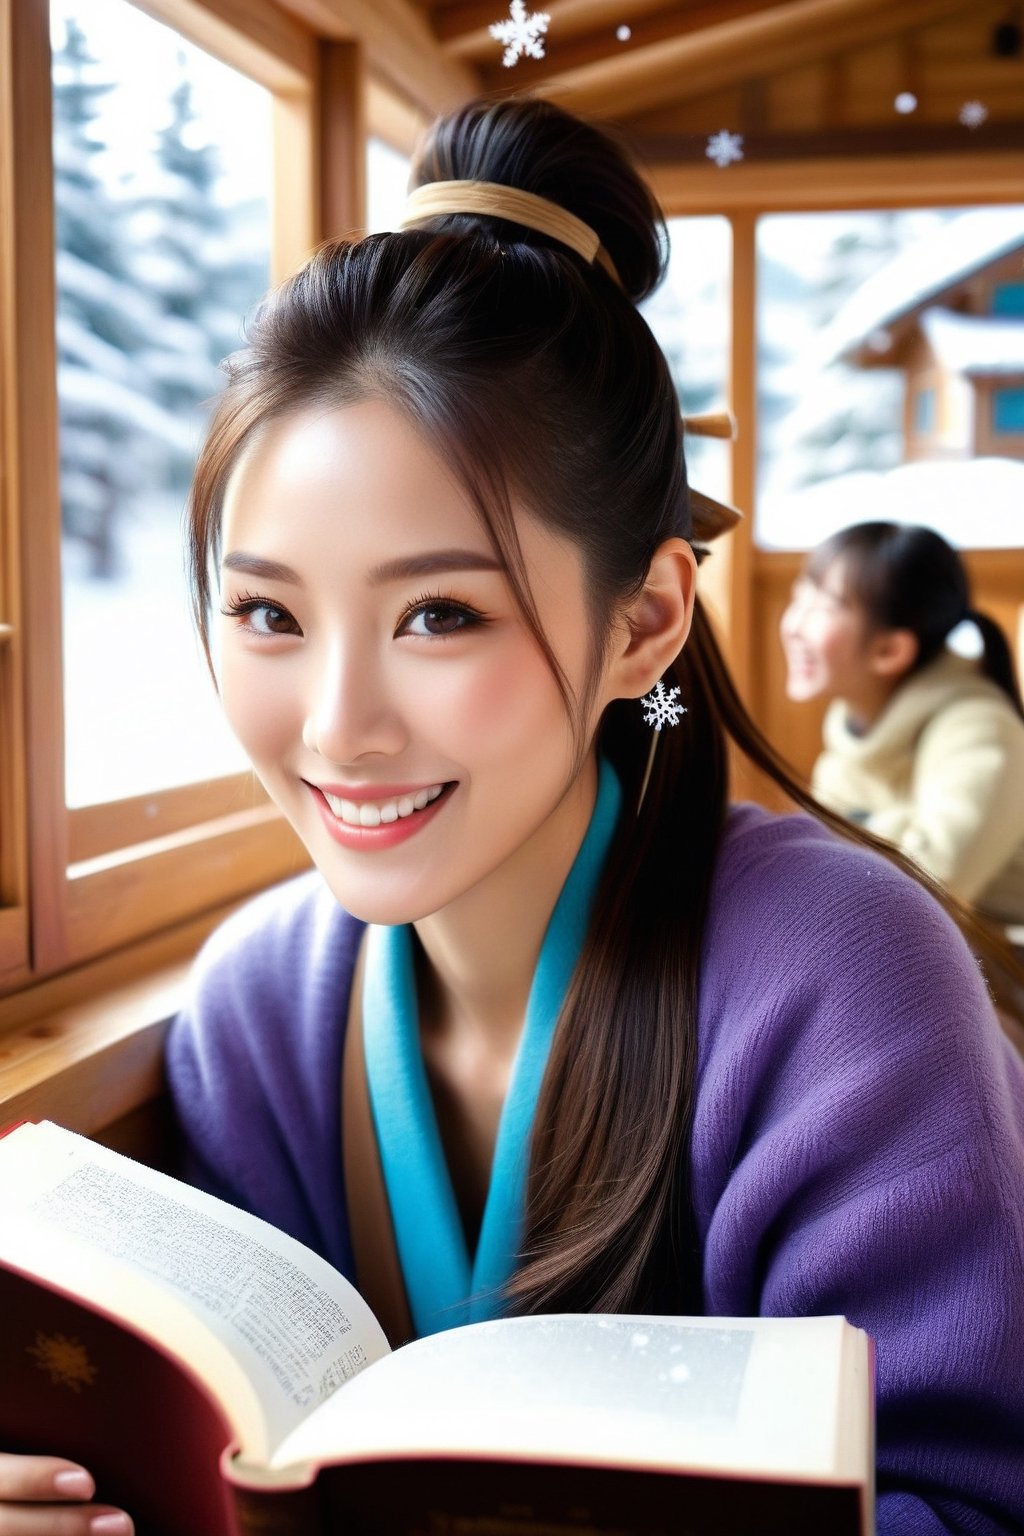 Super detailed close-up portrait,surreal, stunning quality, masterpiece, best quality, awesome, inspiring, smiling funny woman with high ponytail hairstyle , a heartwarming portrait of a kind-eyed Korean woman with a smile that radiates warmth as she reads to a group of children nestled in a cozy cabin as snowflakes fall gently outside the window.